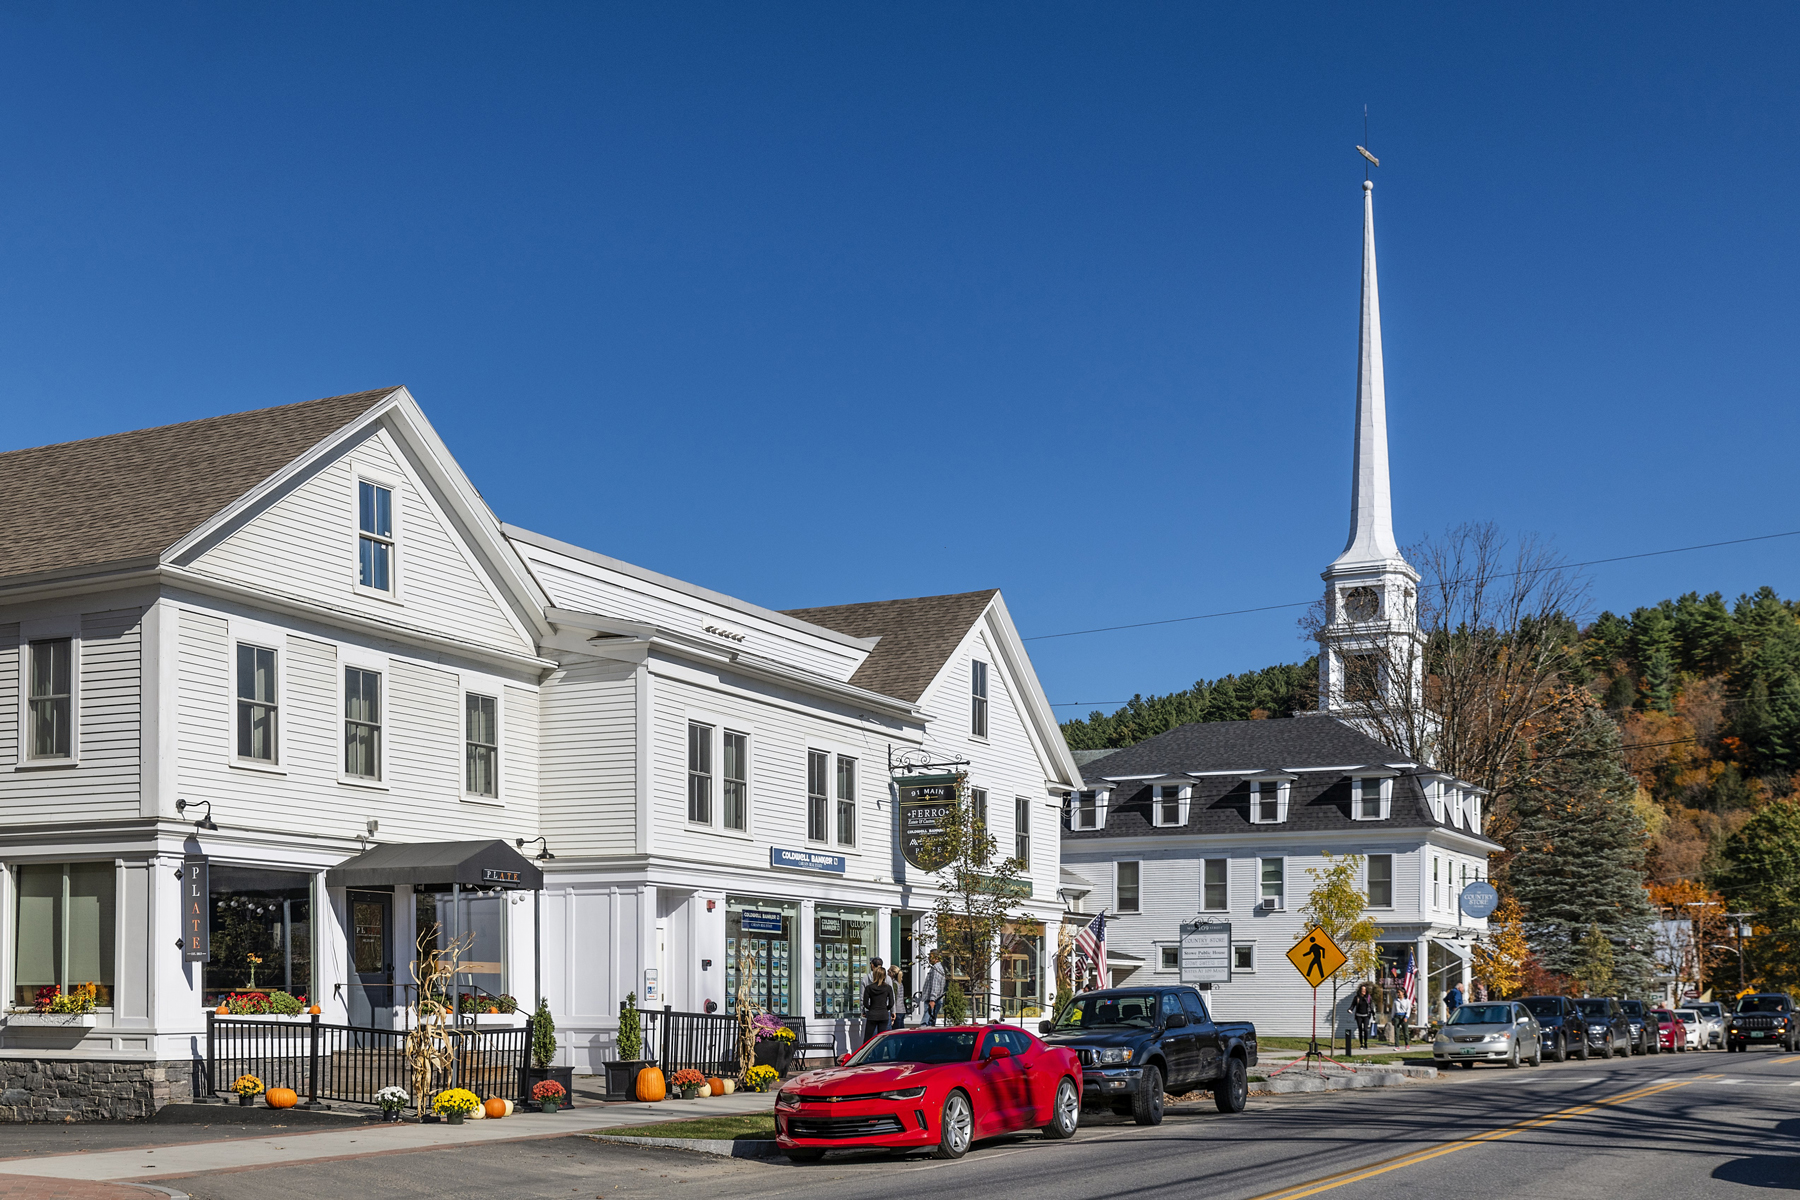 The charming village of Stowe in Vermont.